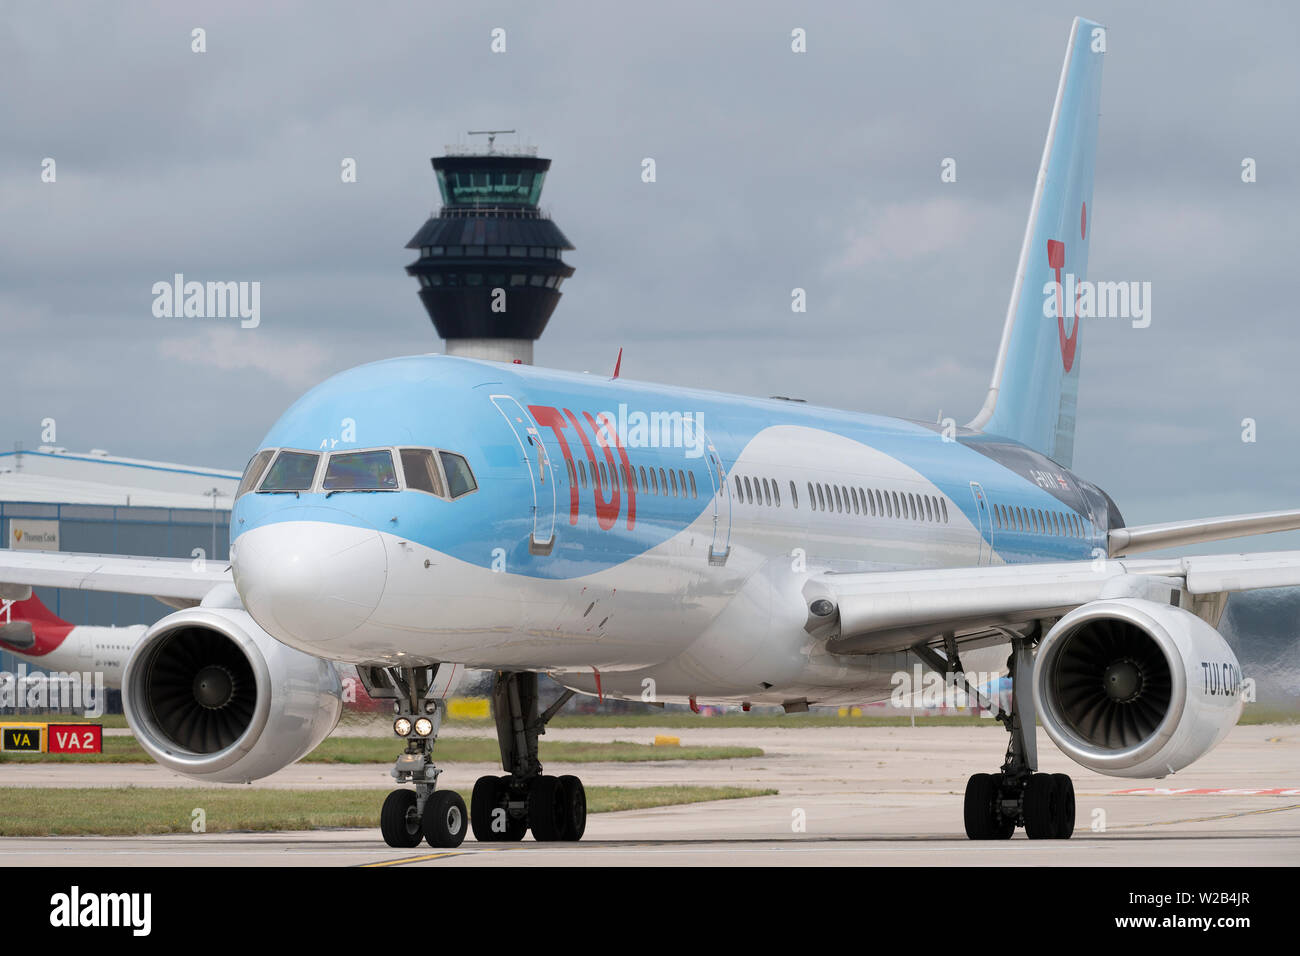 A TUI Boeing 787-8 Dreamliner taxis on the runway at Manchester Airport, UK. Stock Photo